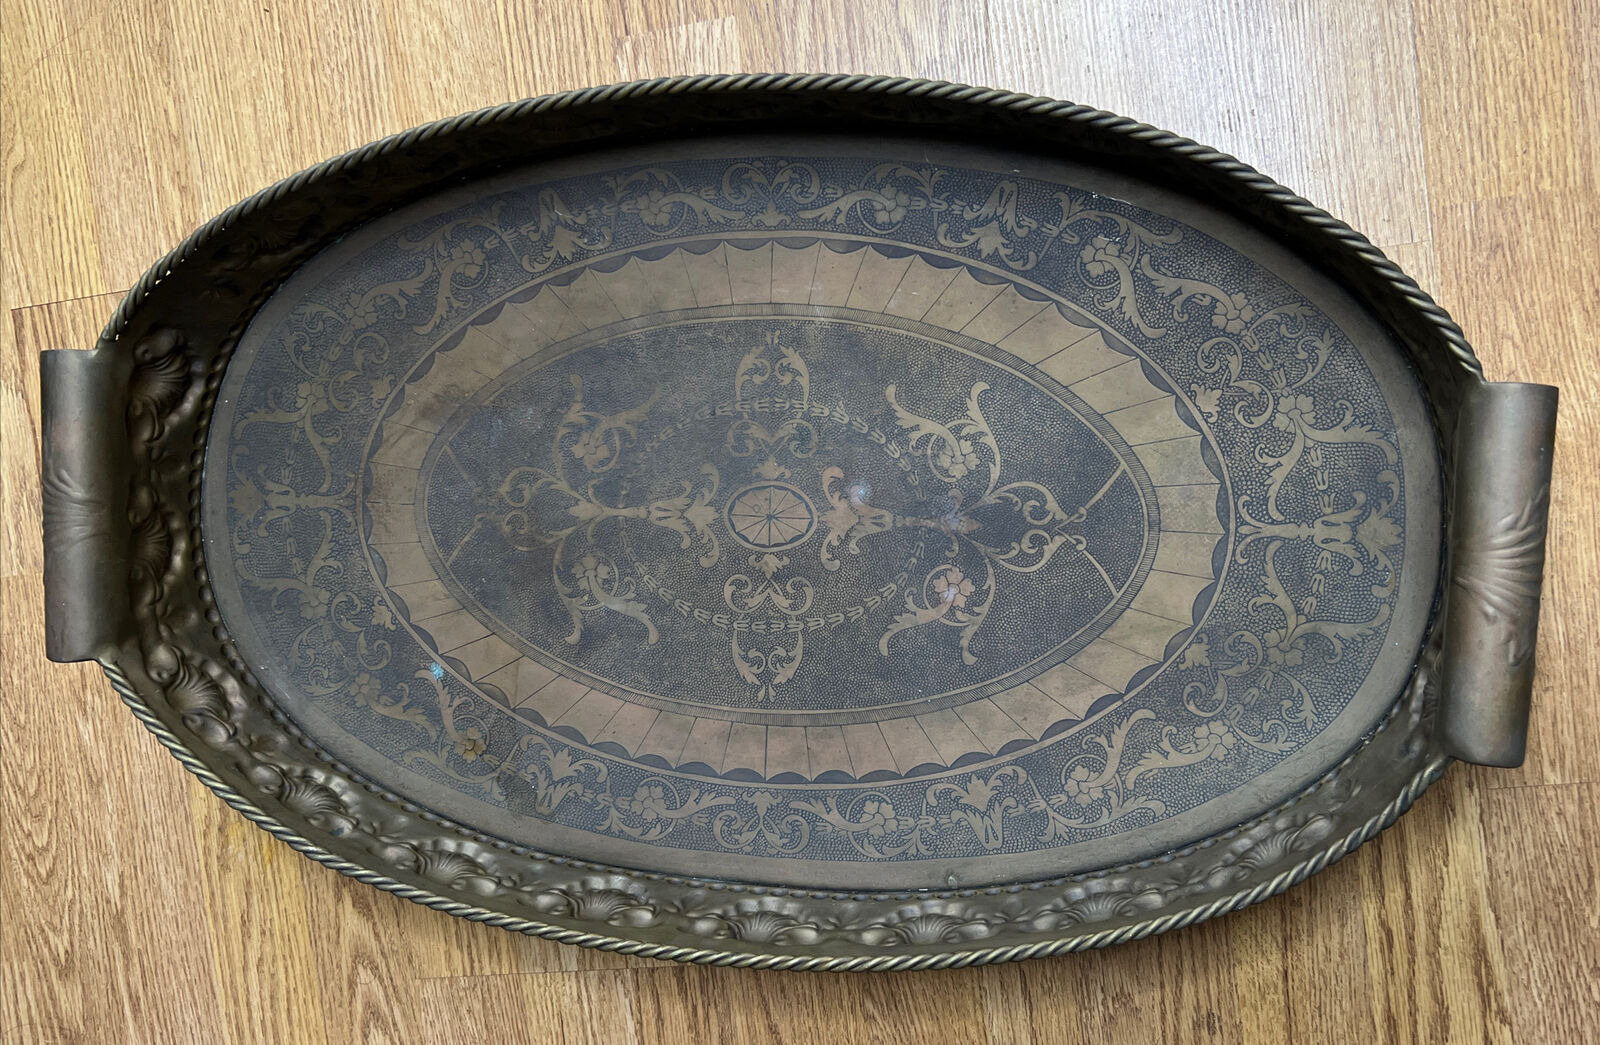 Castilian Imports Vintage Large Solid Brass Heavy Decorated Tray 27.5”X 16” X 4”